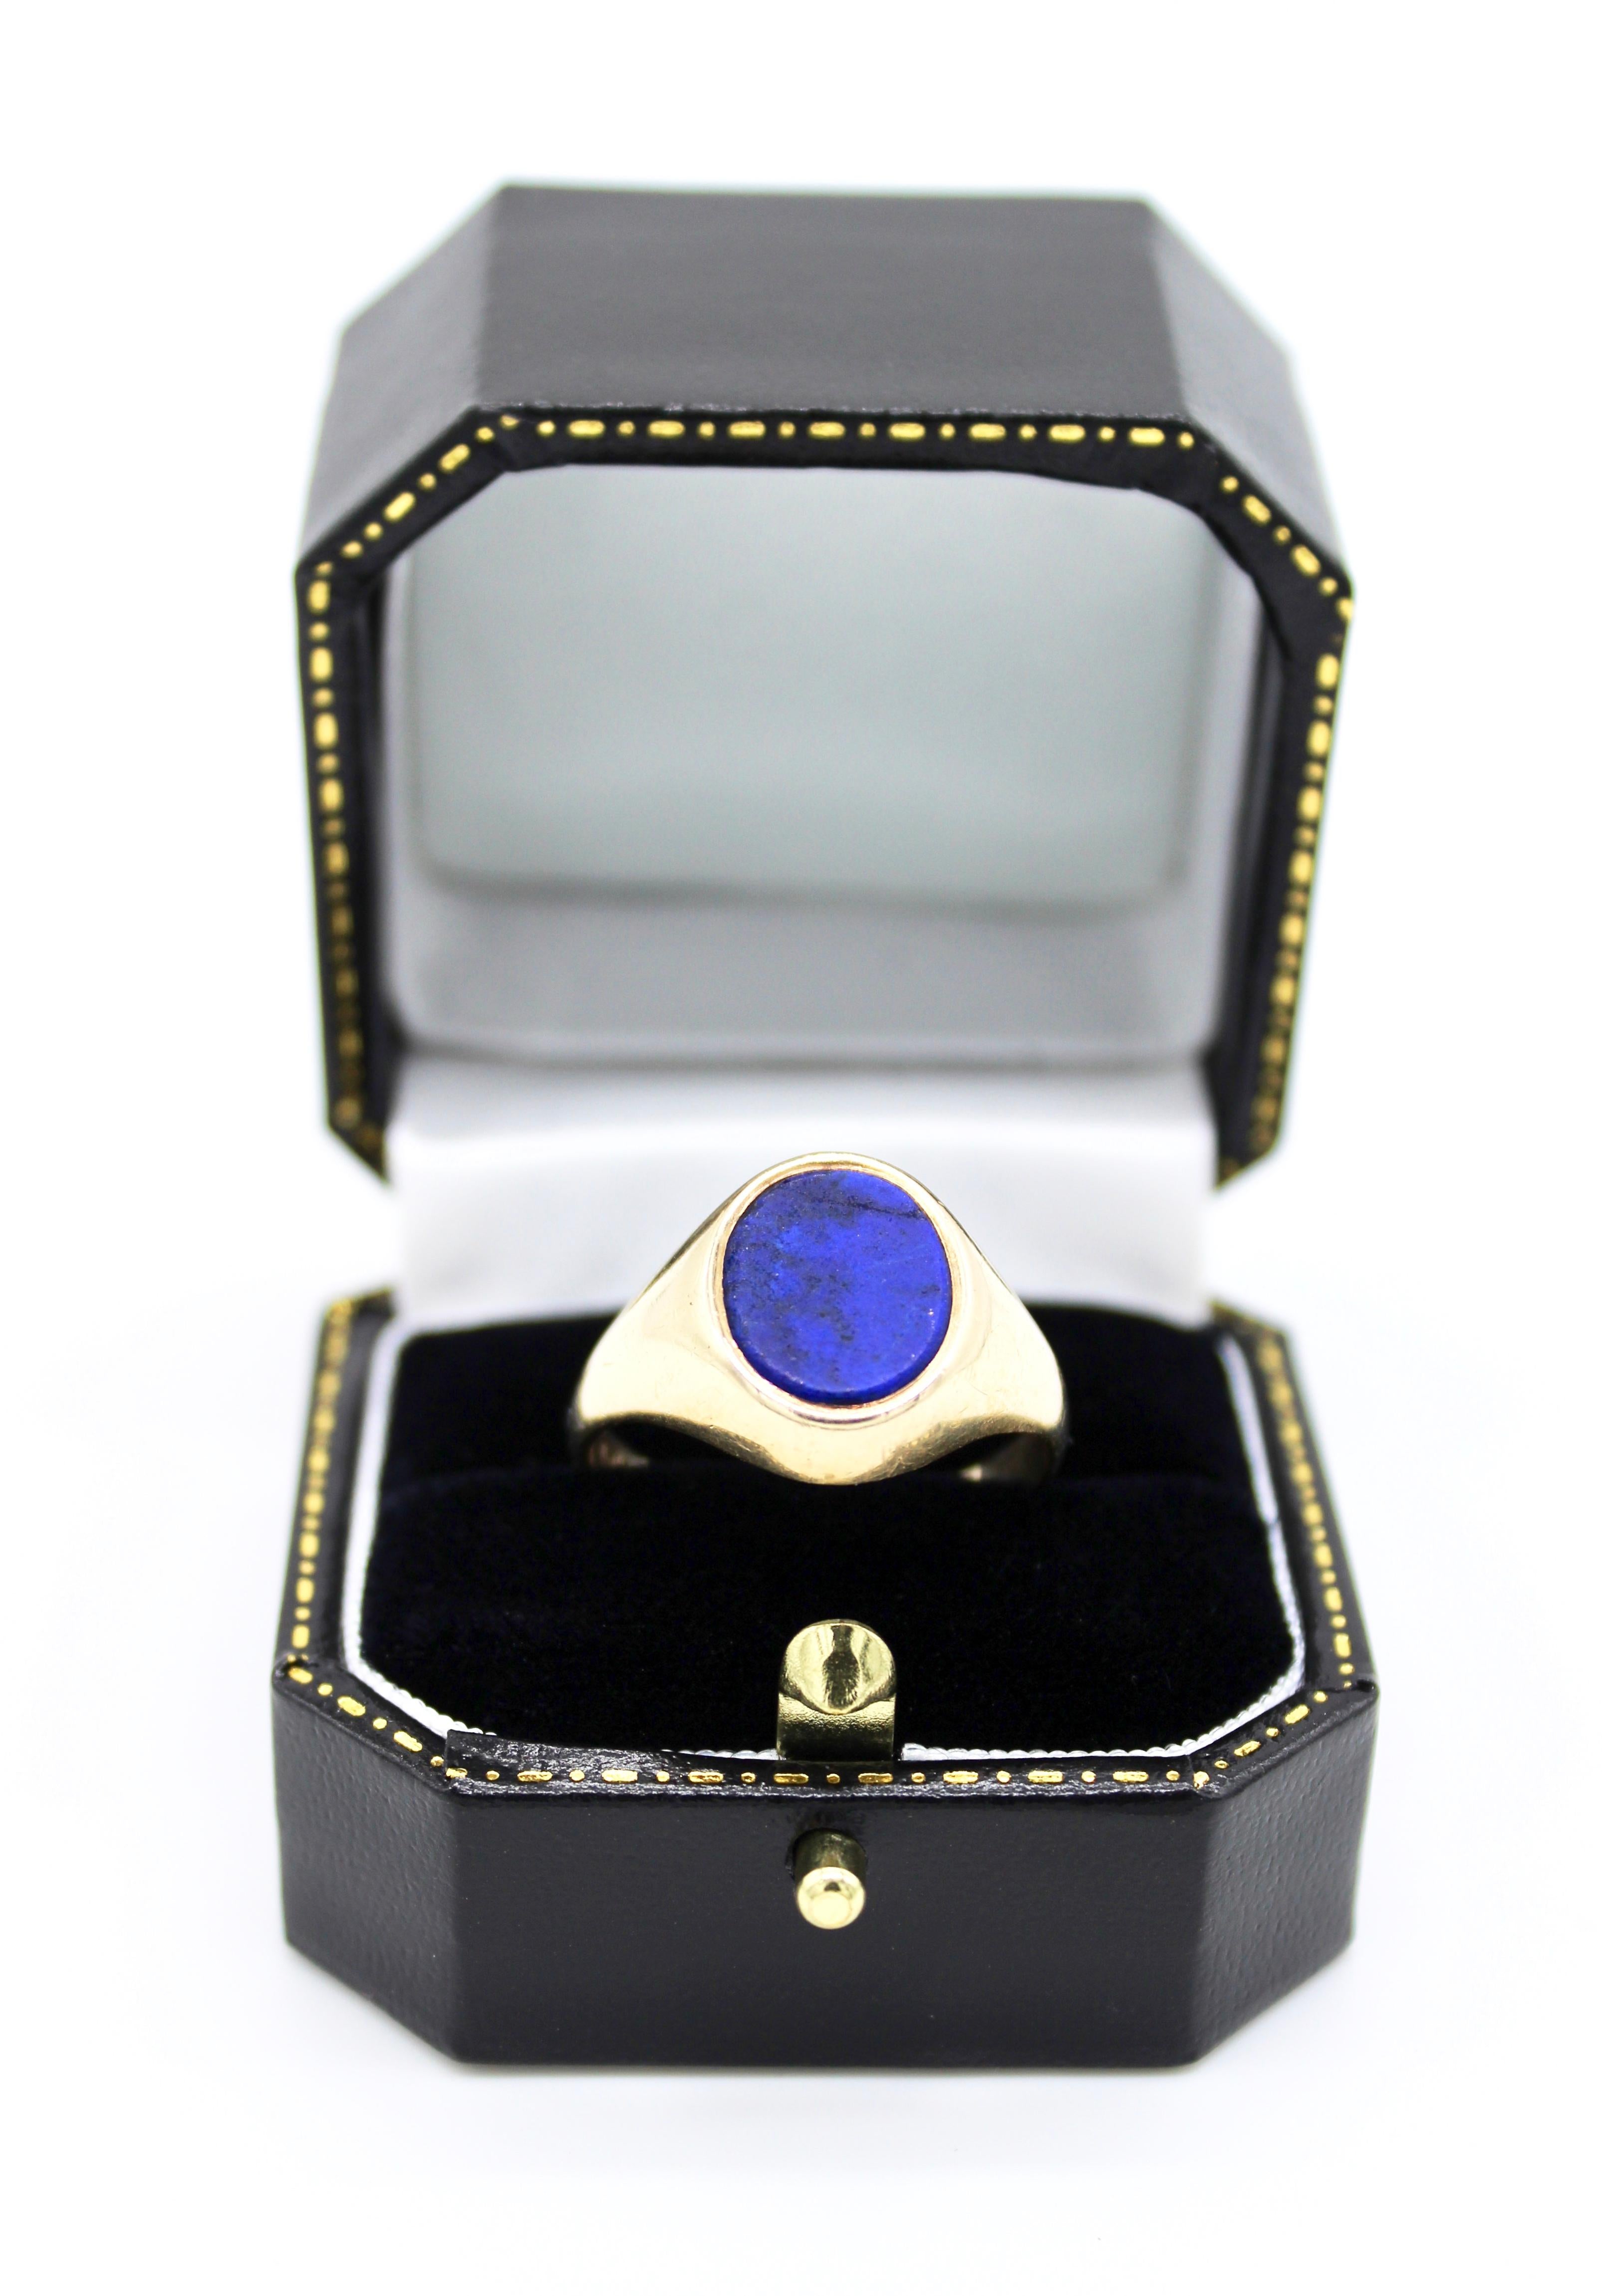 Men's 9 Kt Yellow Gold and Lapis Lazuli Oval Faced Gentleman's Signet Ring